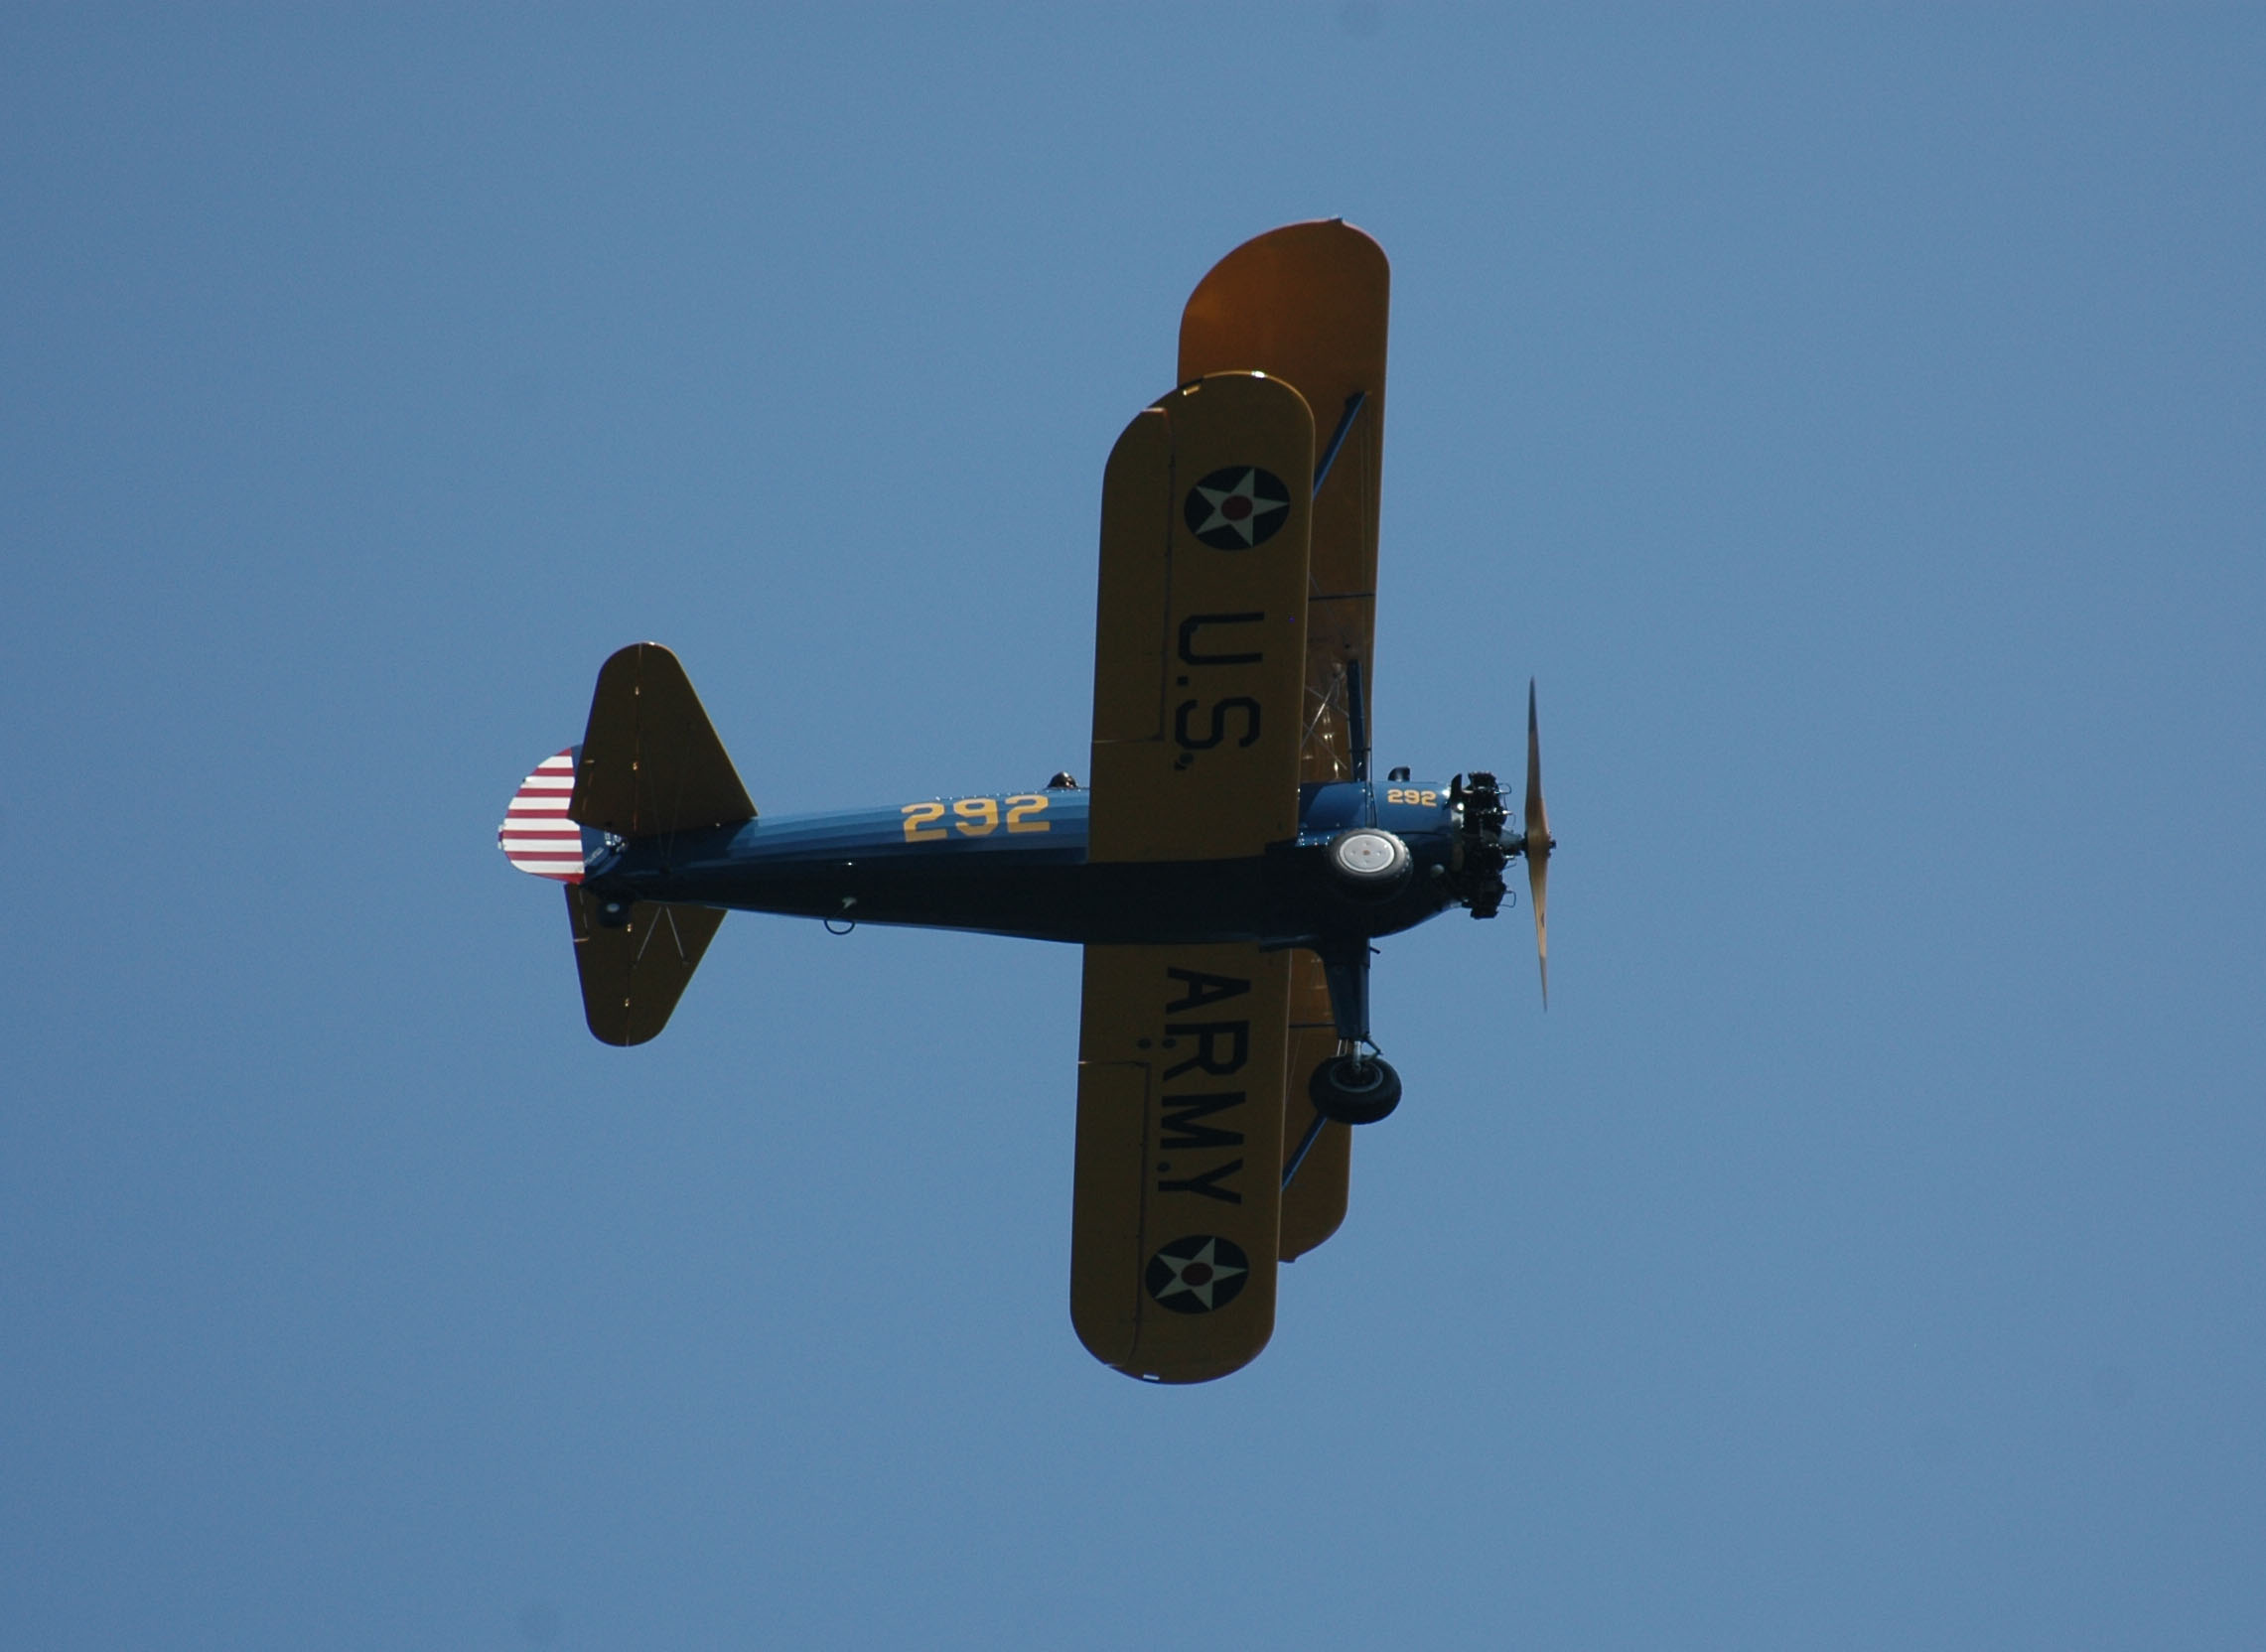 A yellow and blue historic biplane against blue sky.